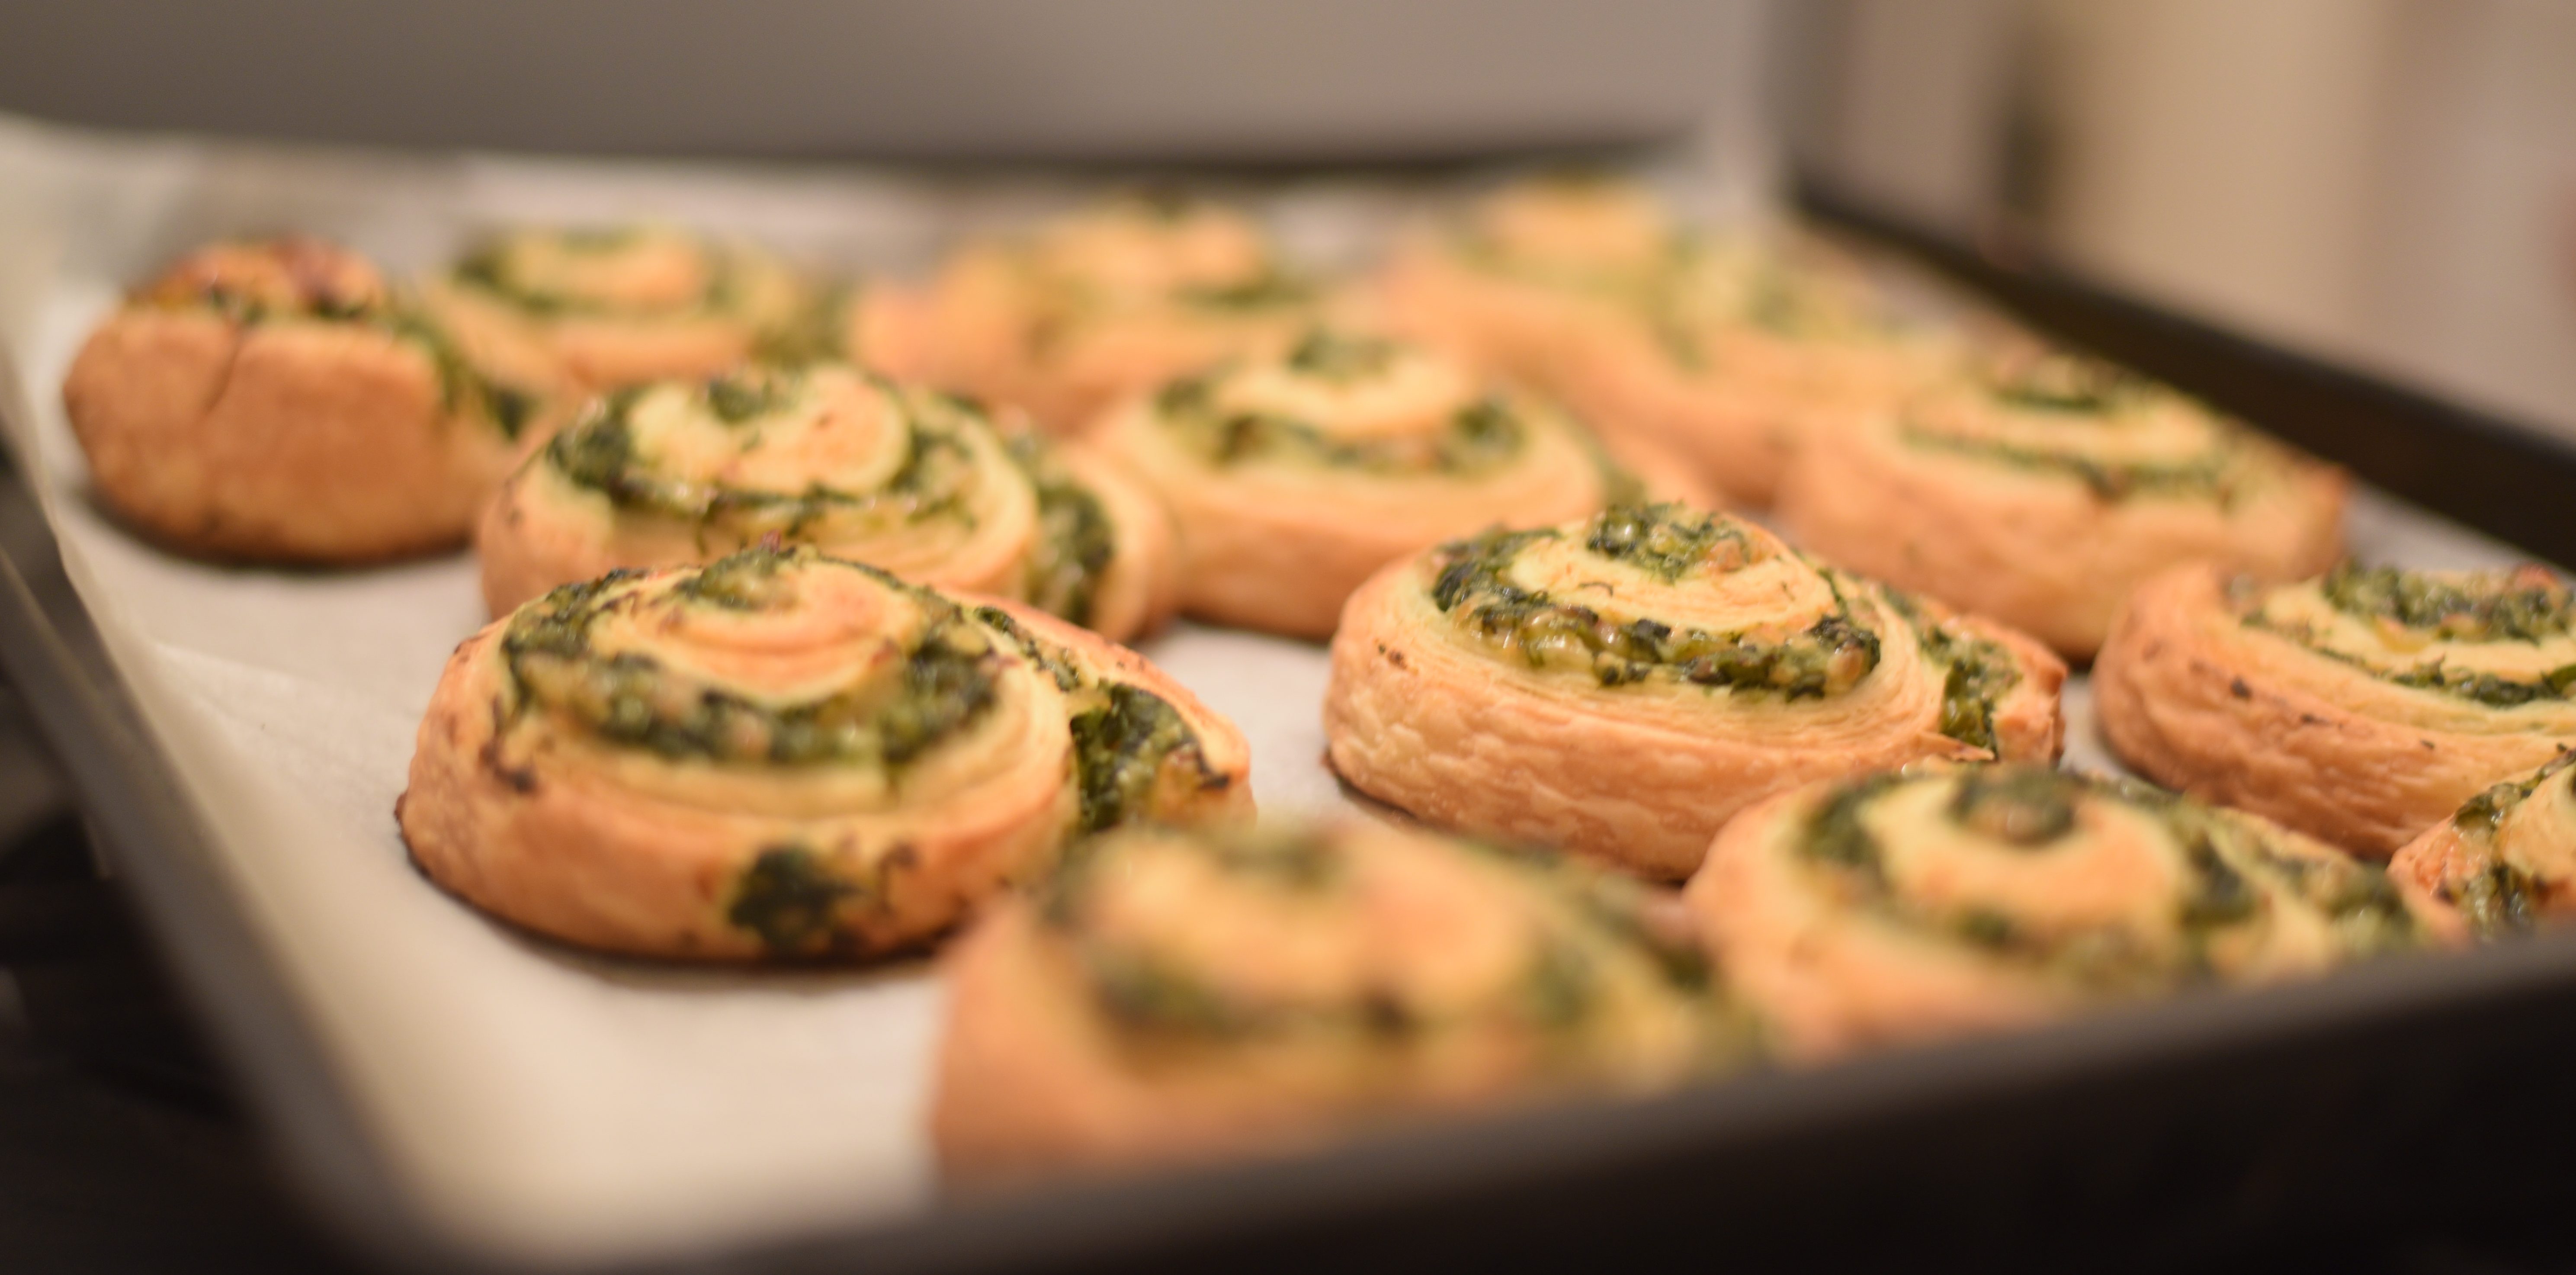 Spinach and cheese rolls